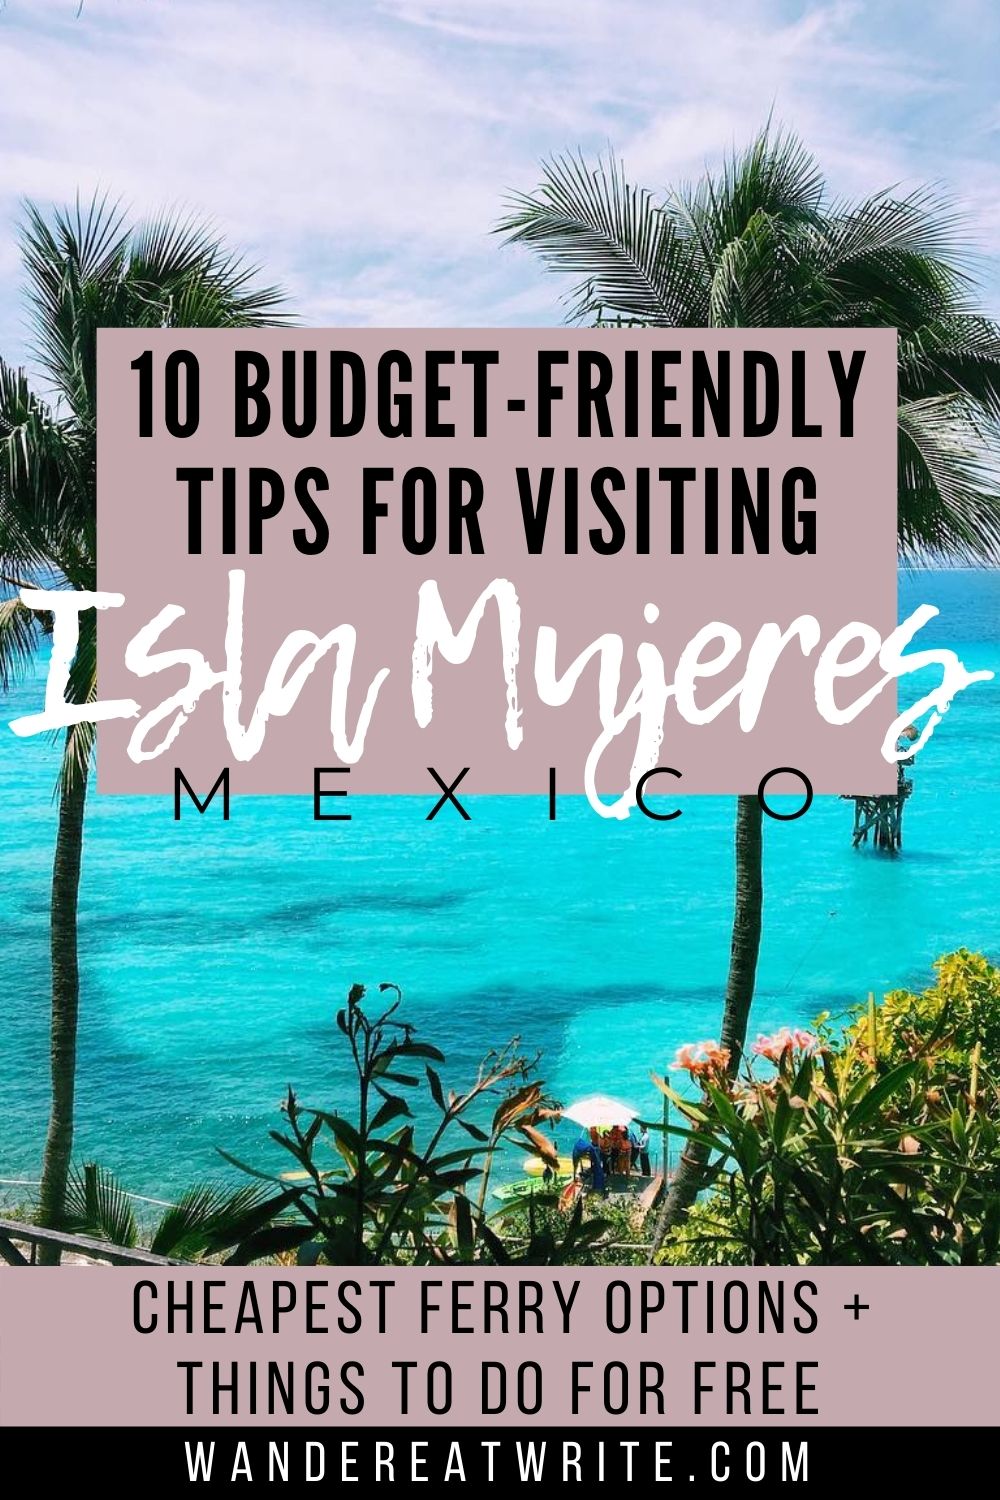 10 Budget-Friendly Tips For Visiting Isla Mujeres, Mexico